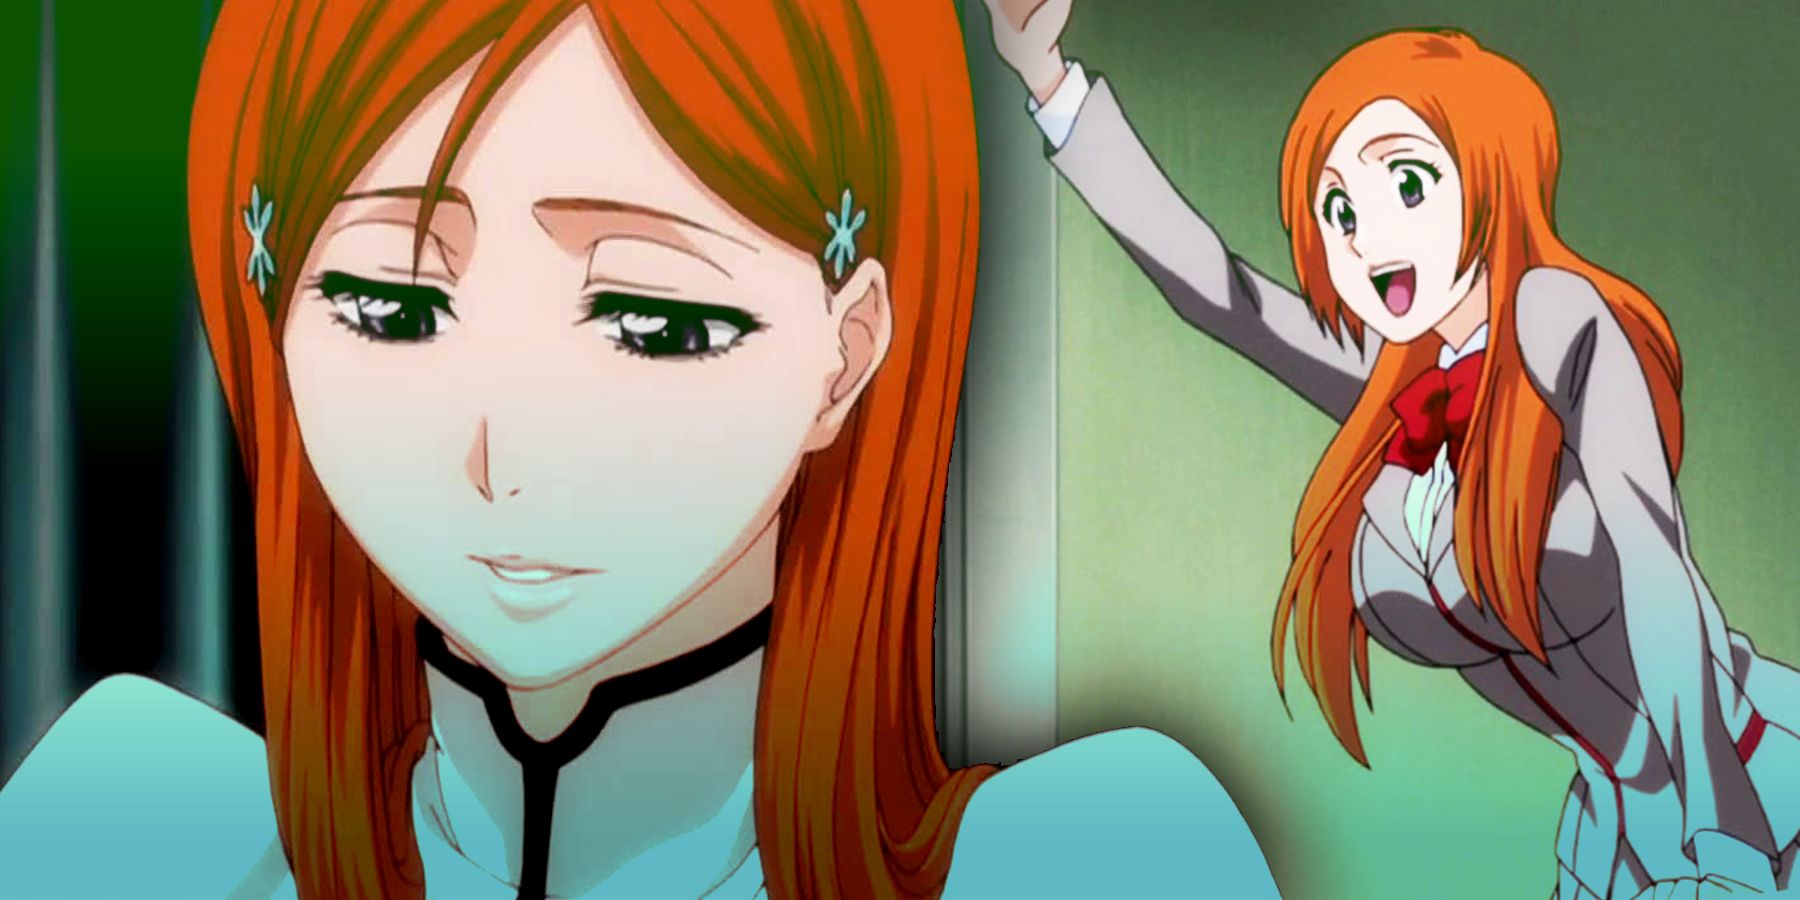 Left: Orihime Inoue looking down in Bleach. Right: Orihime smiling and waving.